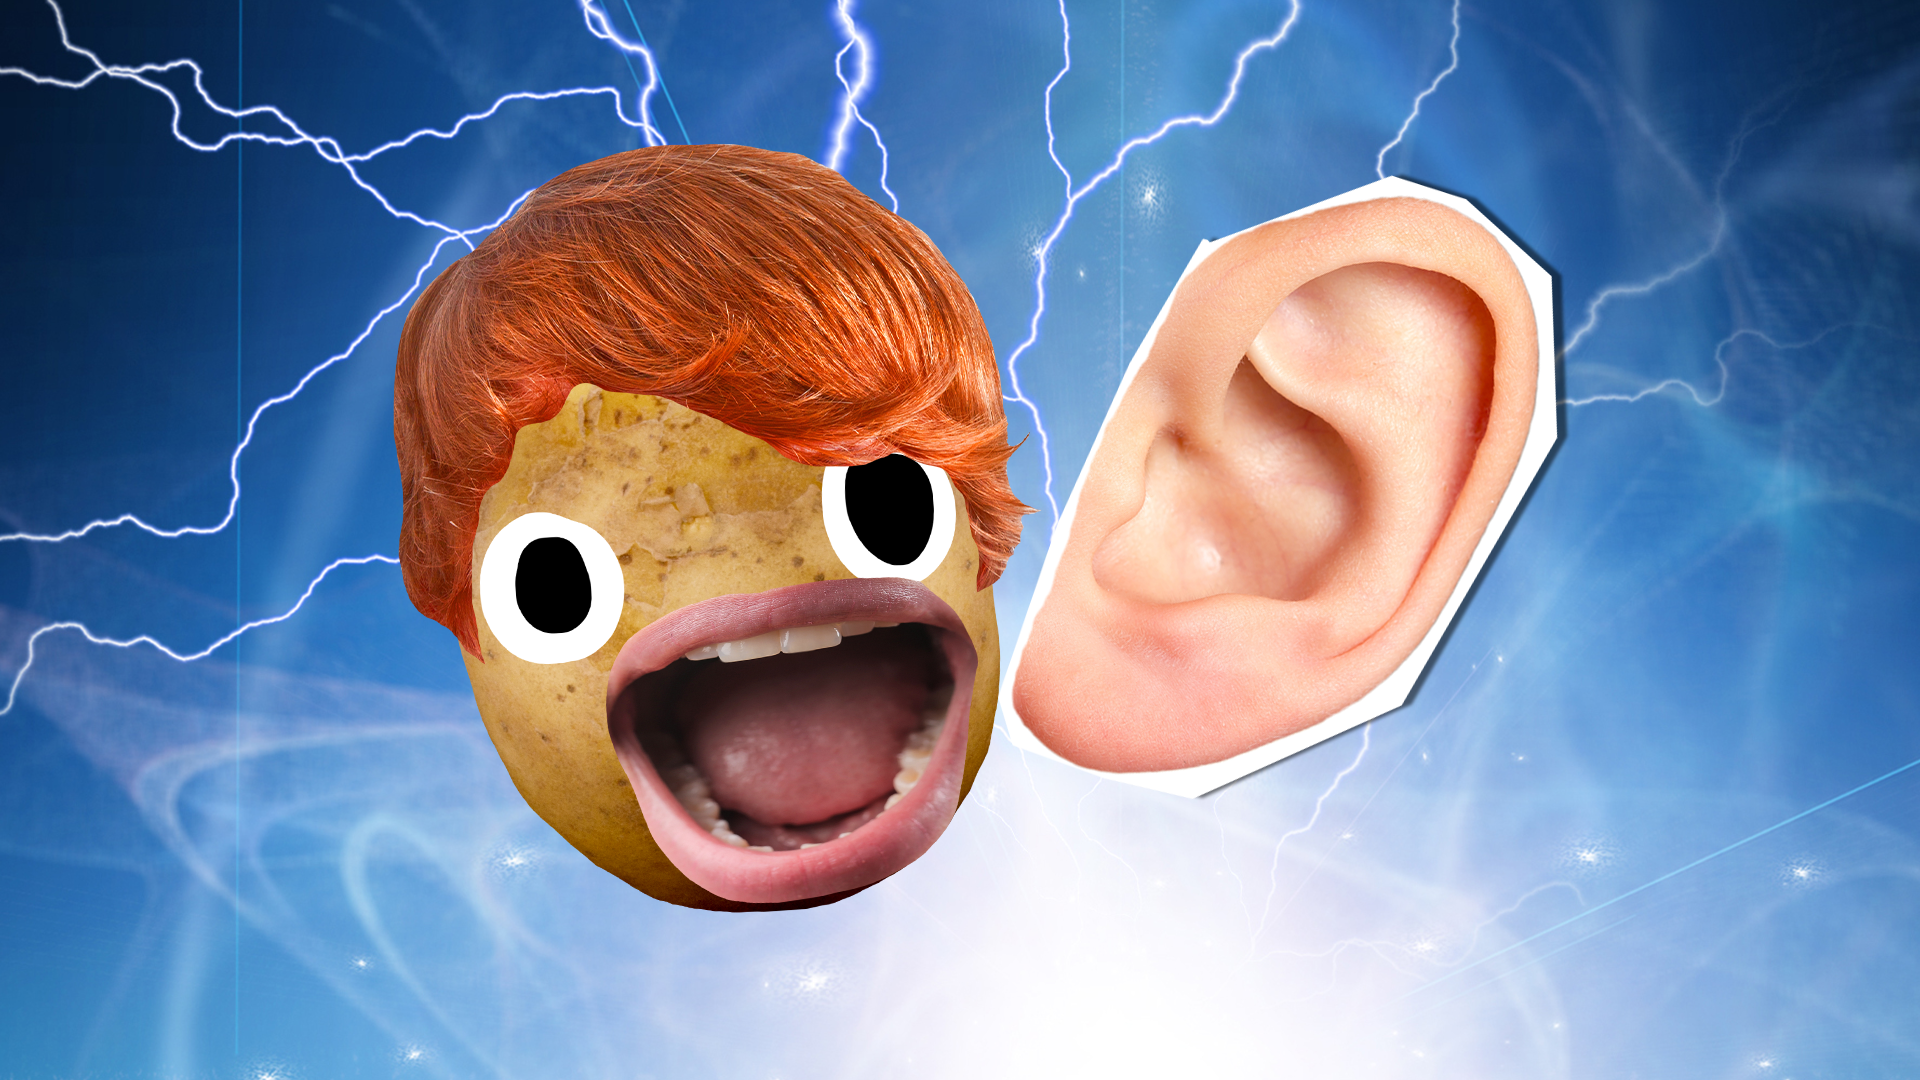 Weasley potato with ear on magic background